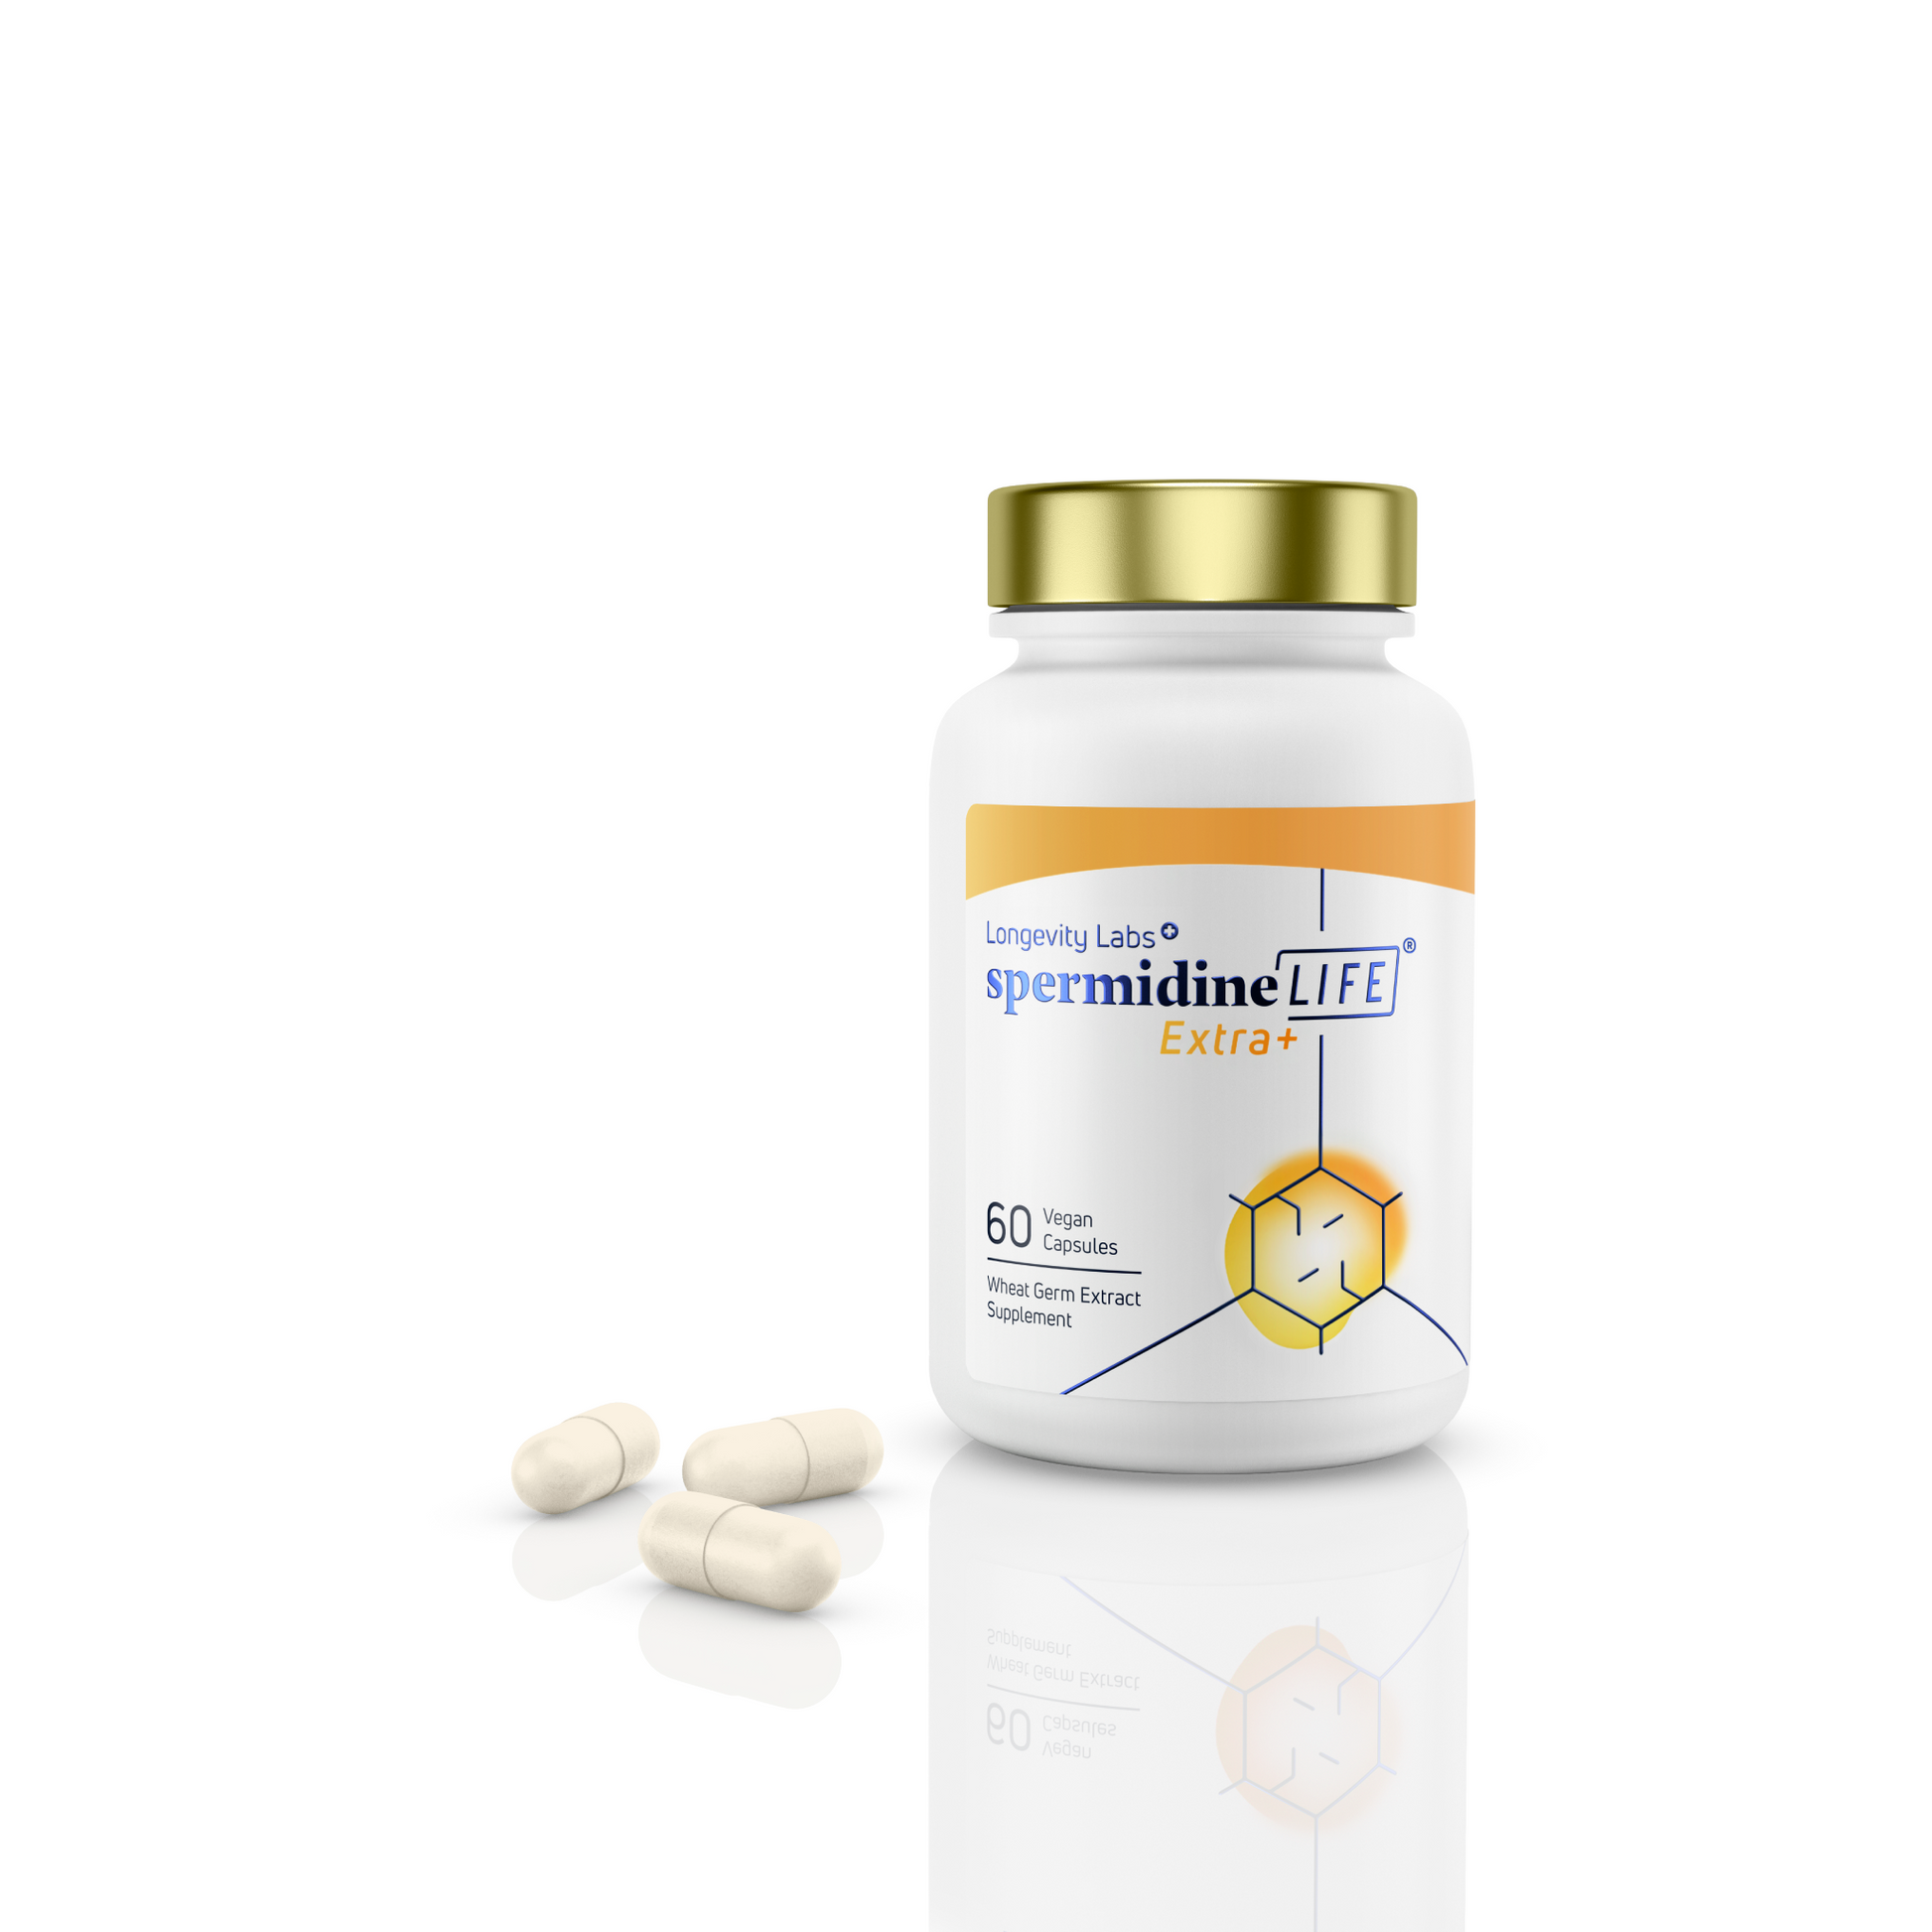 A bottle of OHP Health's spermidineLIFE® Extra+ 1300mg Dietary Supplement for longevity, displayed with pills on a white background.